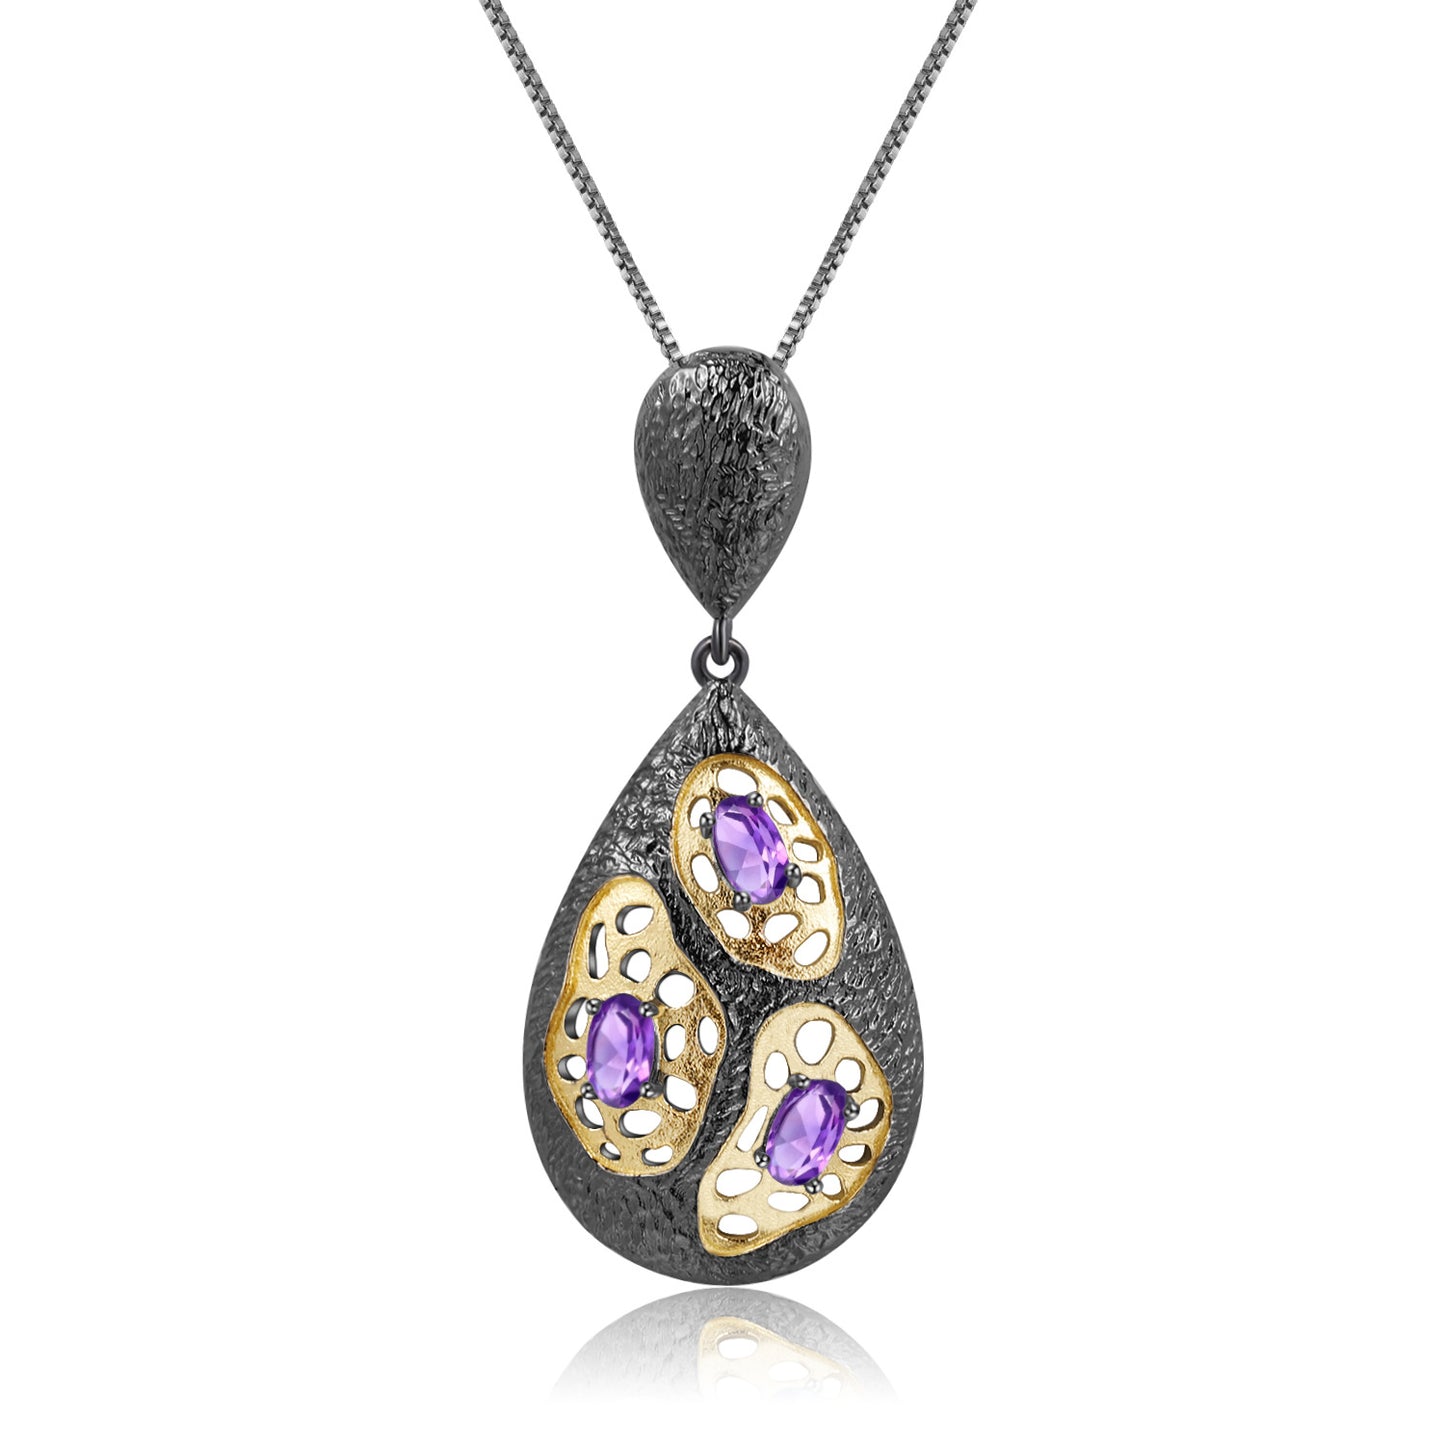 Italian Craft Design Vintage Luxury Sense Inlaid Natural Colourful Gemstone Pear Drop Pendant Silver Necklace for Women